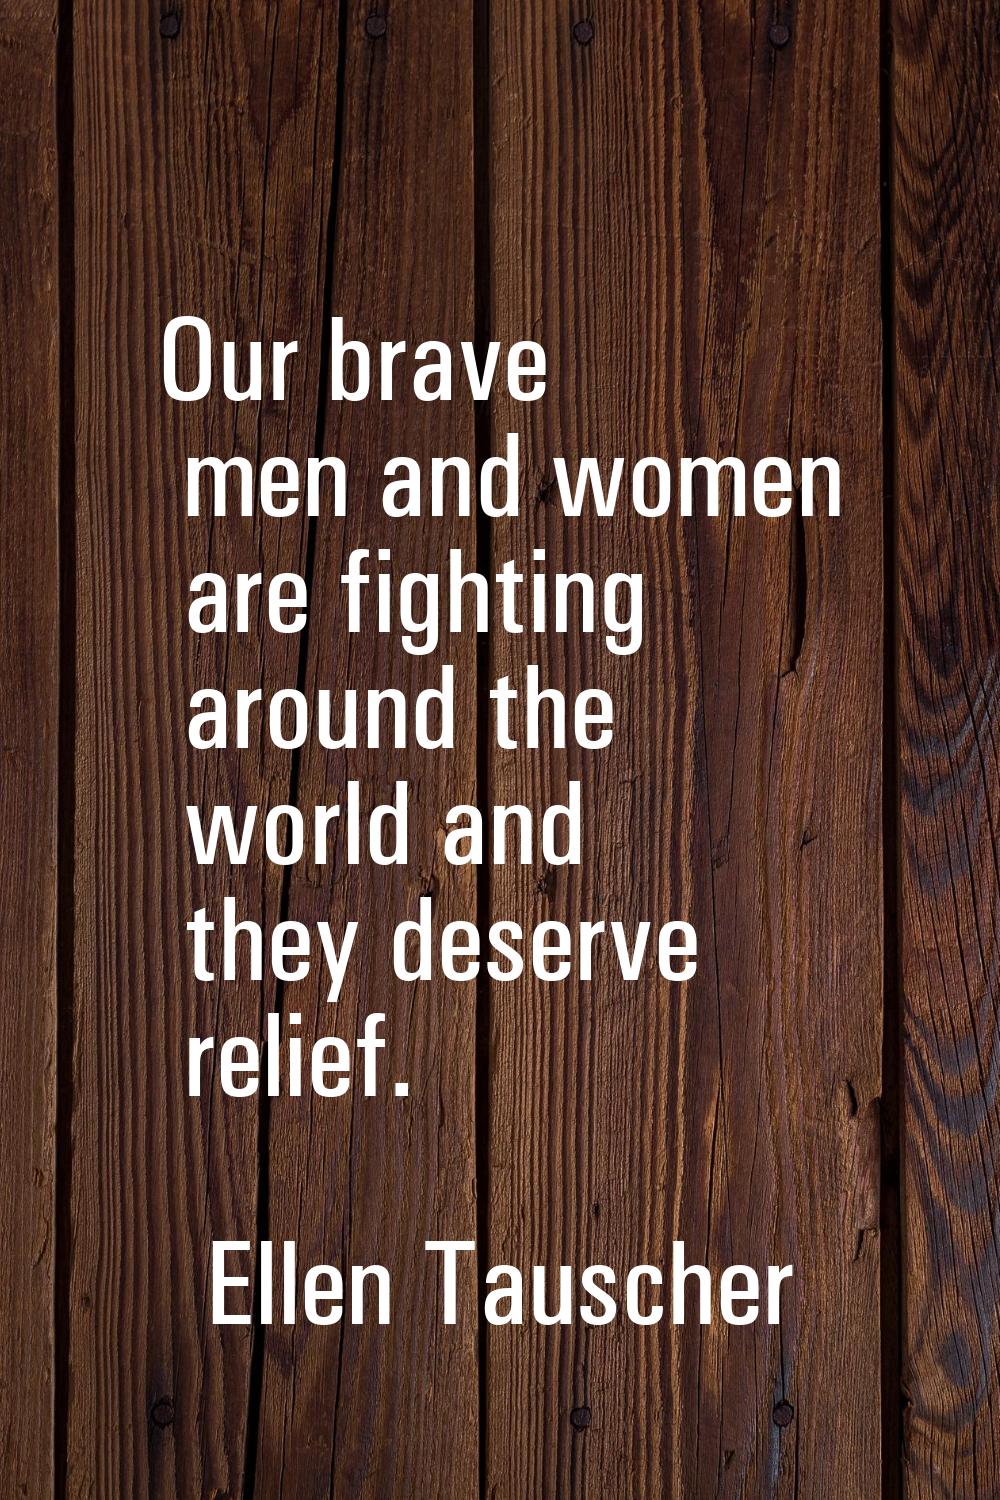 Our brave men and women are fighting around the world and they deserve relief.